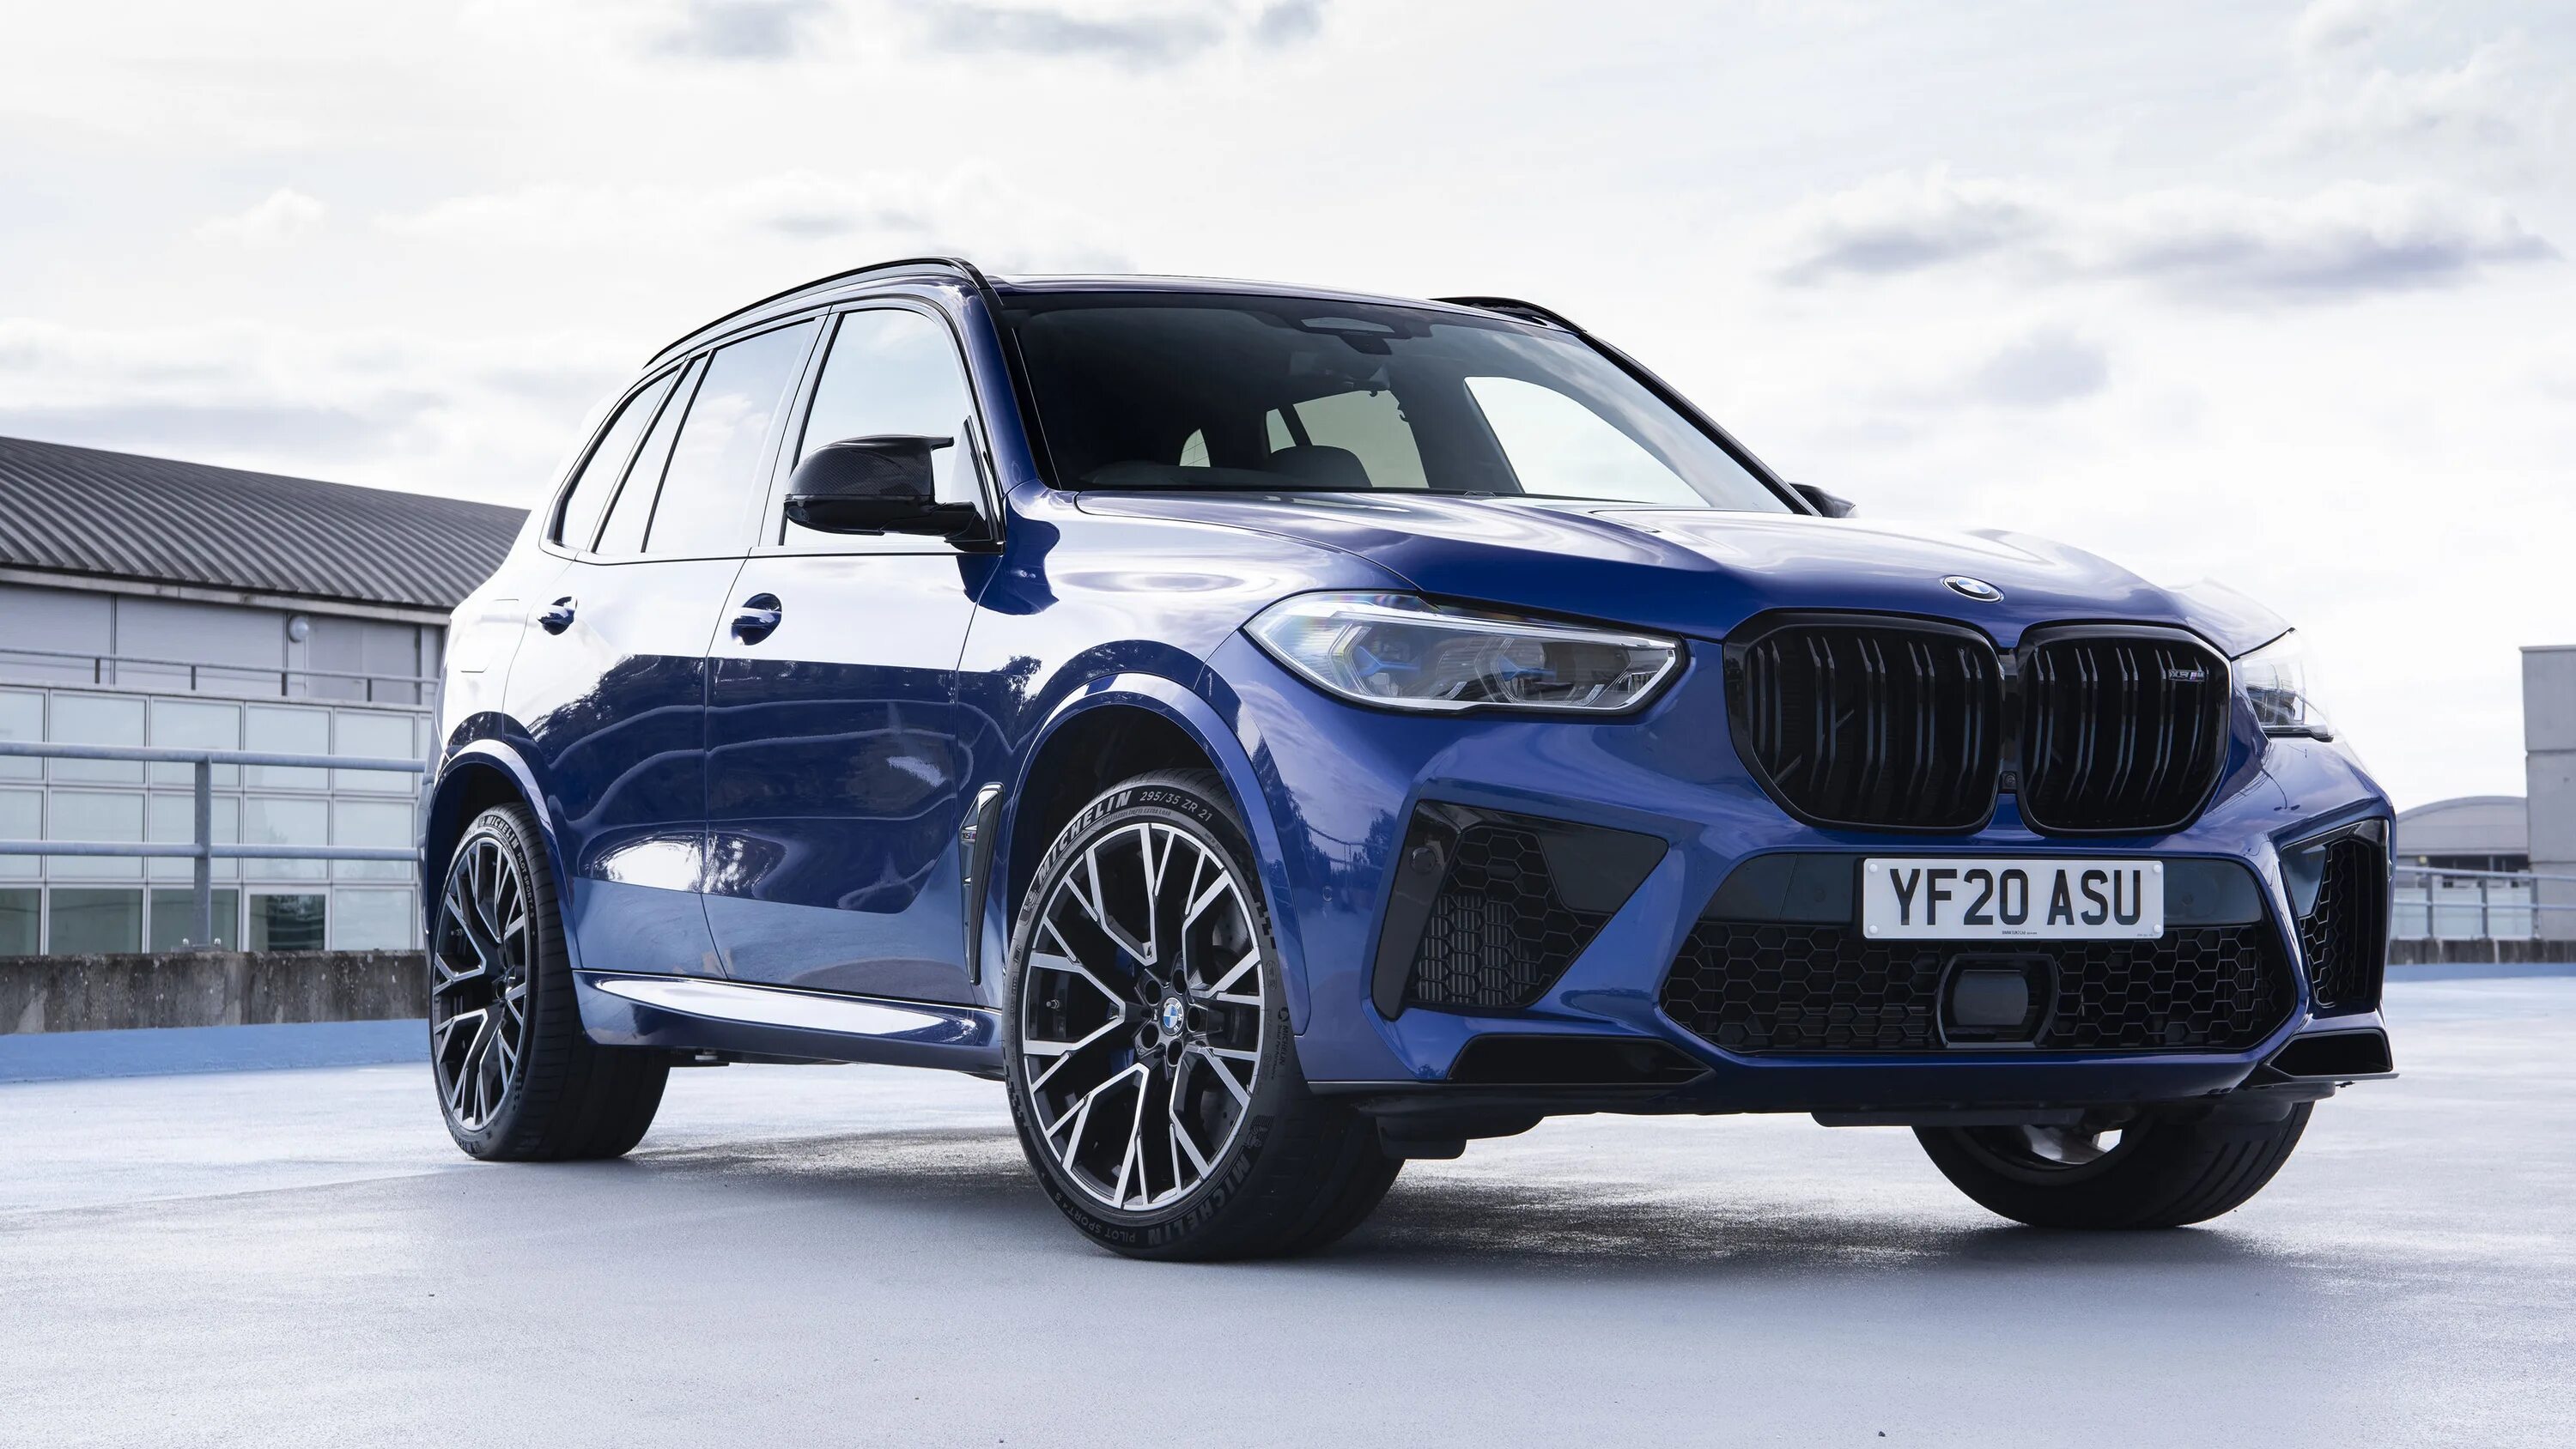 X 5 21 3x. BMW x5m 2020. БМВ x5m 2021. BMW x5 m Competition 2020. BMW x5m Competition 2021.